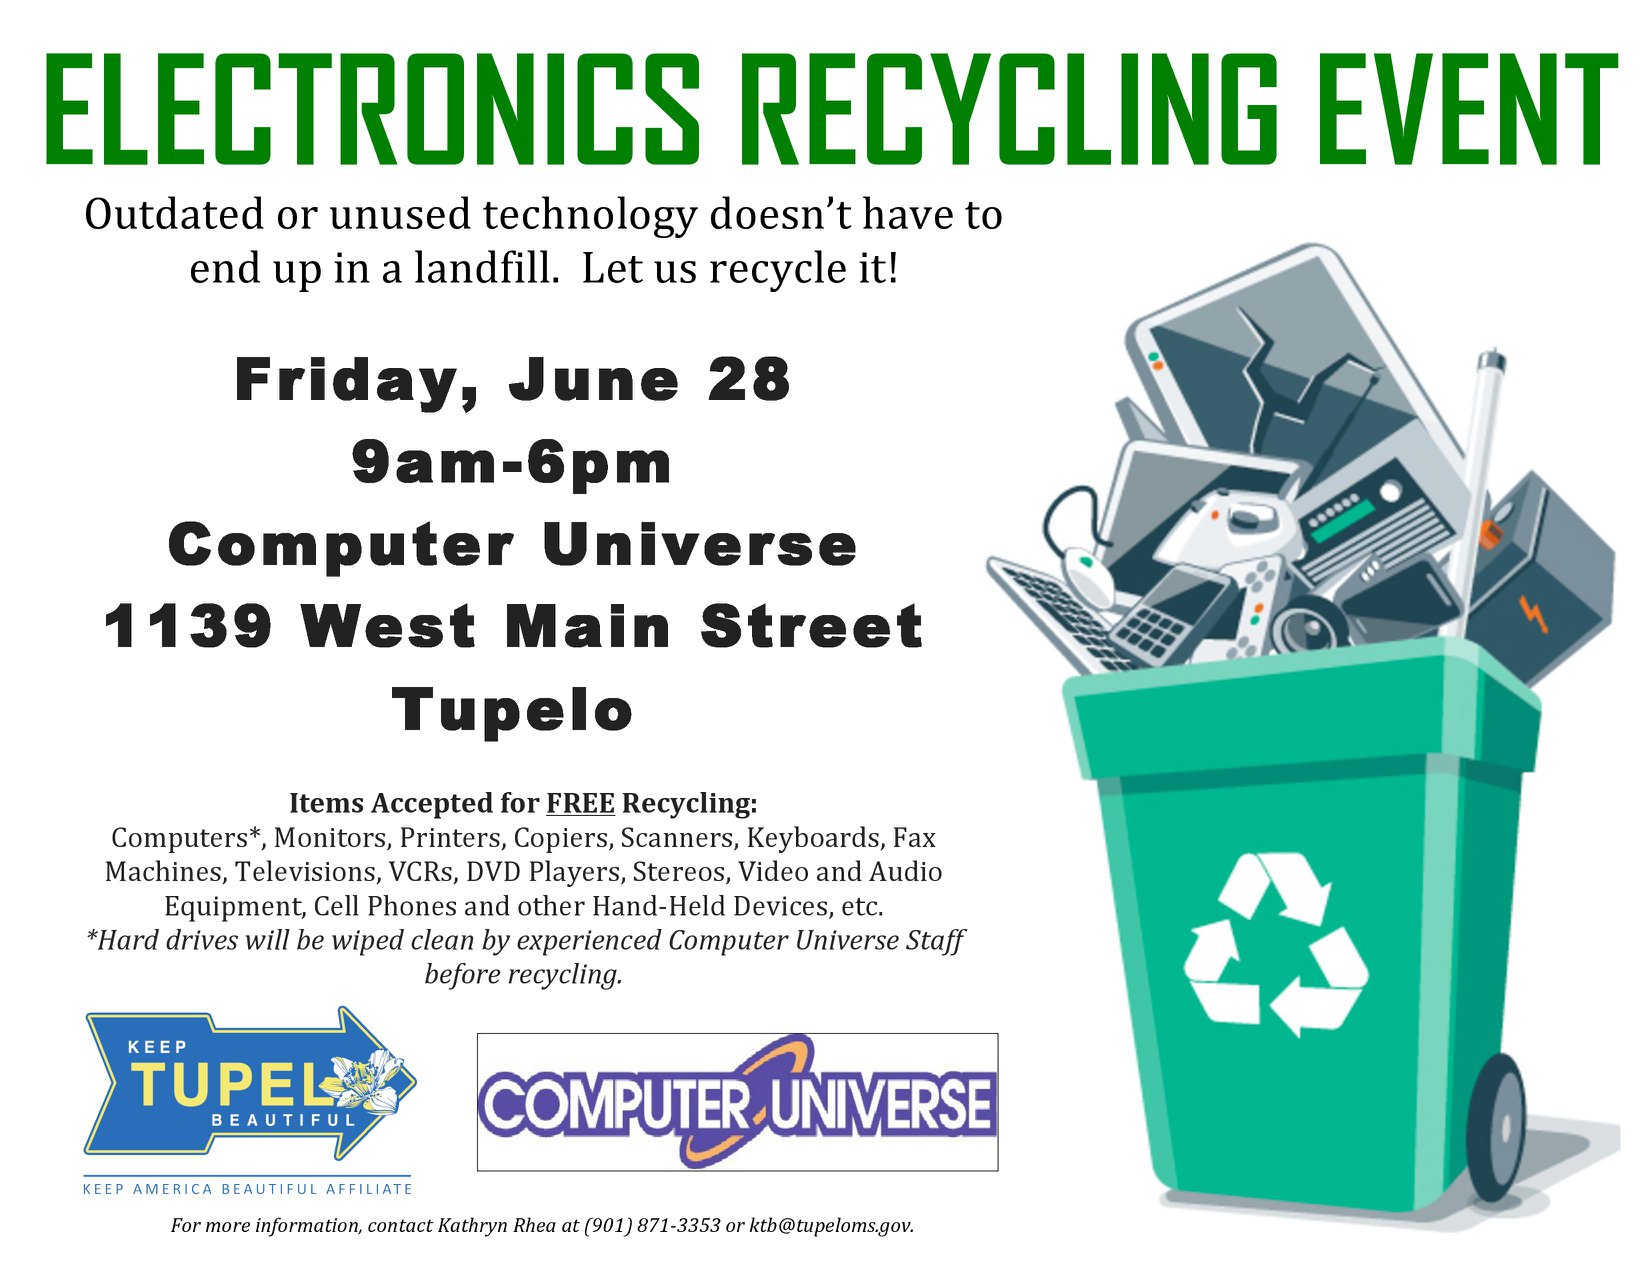 Take advantage of this FREE Electronics Recycling event as an